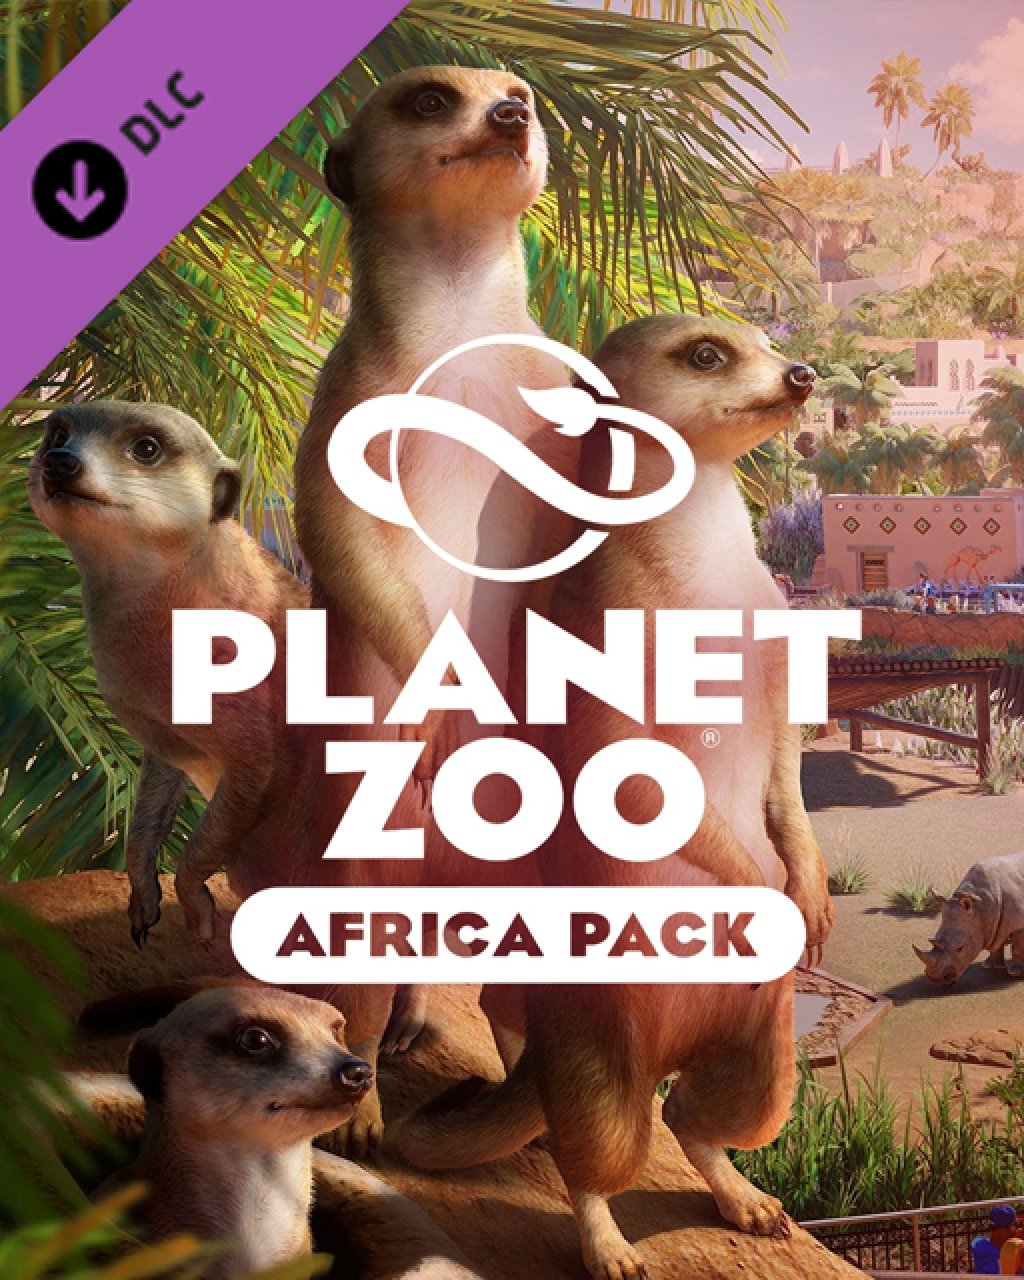 ESD Planet Zoo Africa Pack